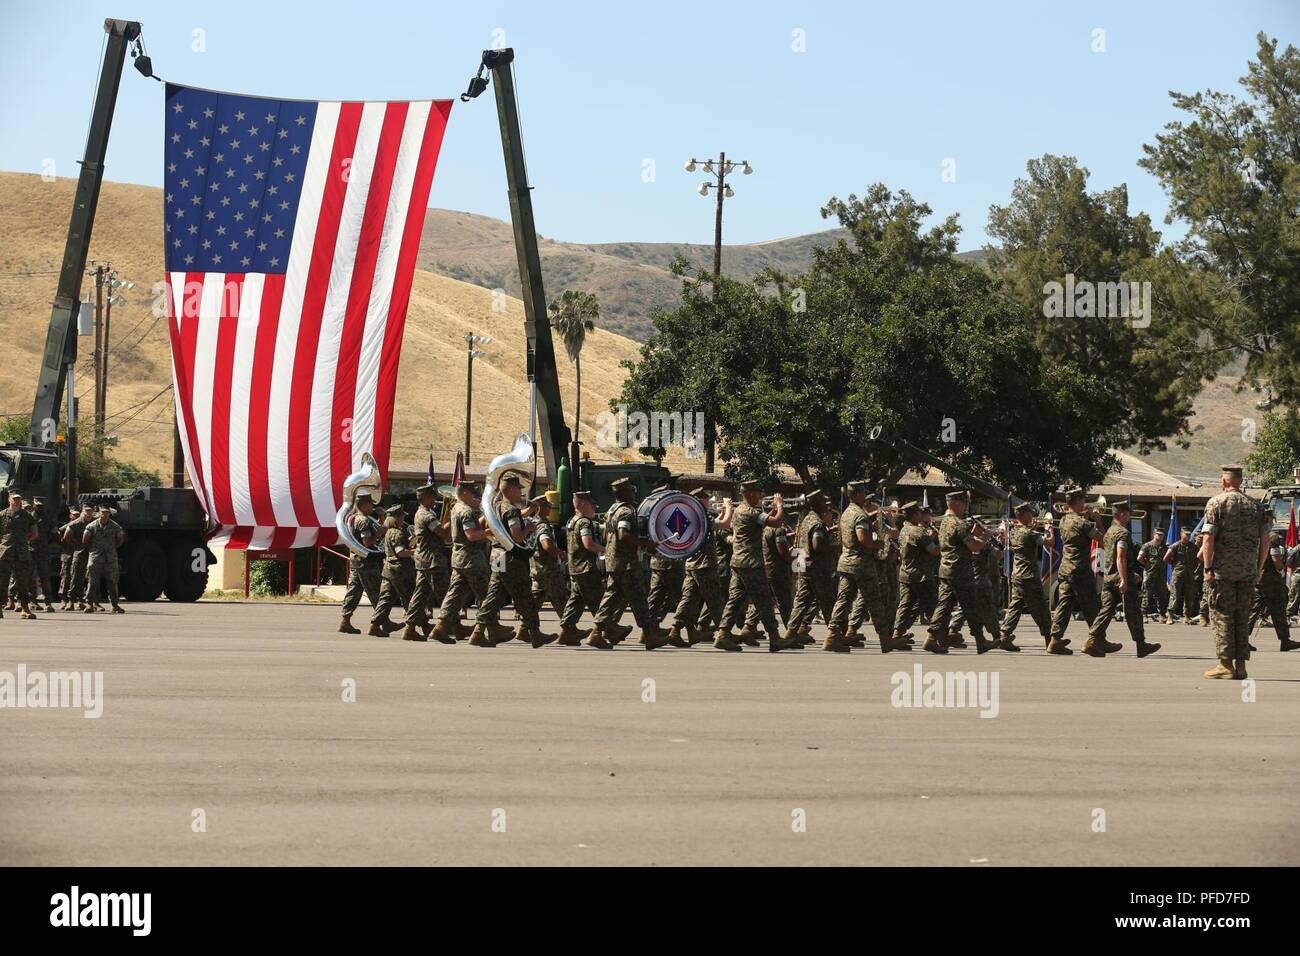 U.S. Marine Band Camp Pendleton performs during a retirement ceremony at Marine Corps Base Camp Pendleton, Calif., June 7, 2018. The ceremony was held in honor of Chief Warrant Officer 5 David C. Thomas for his 30 years of meritorious service. Stock Photo